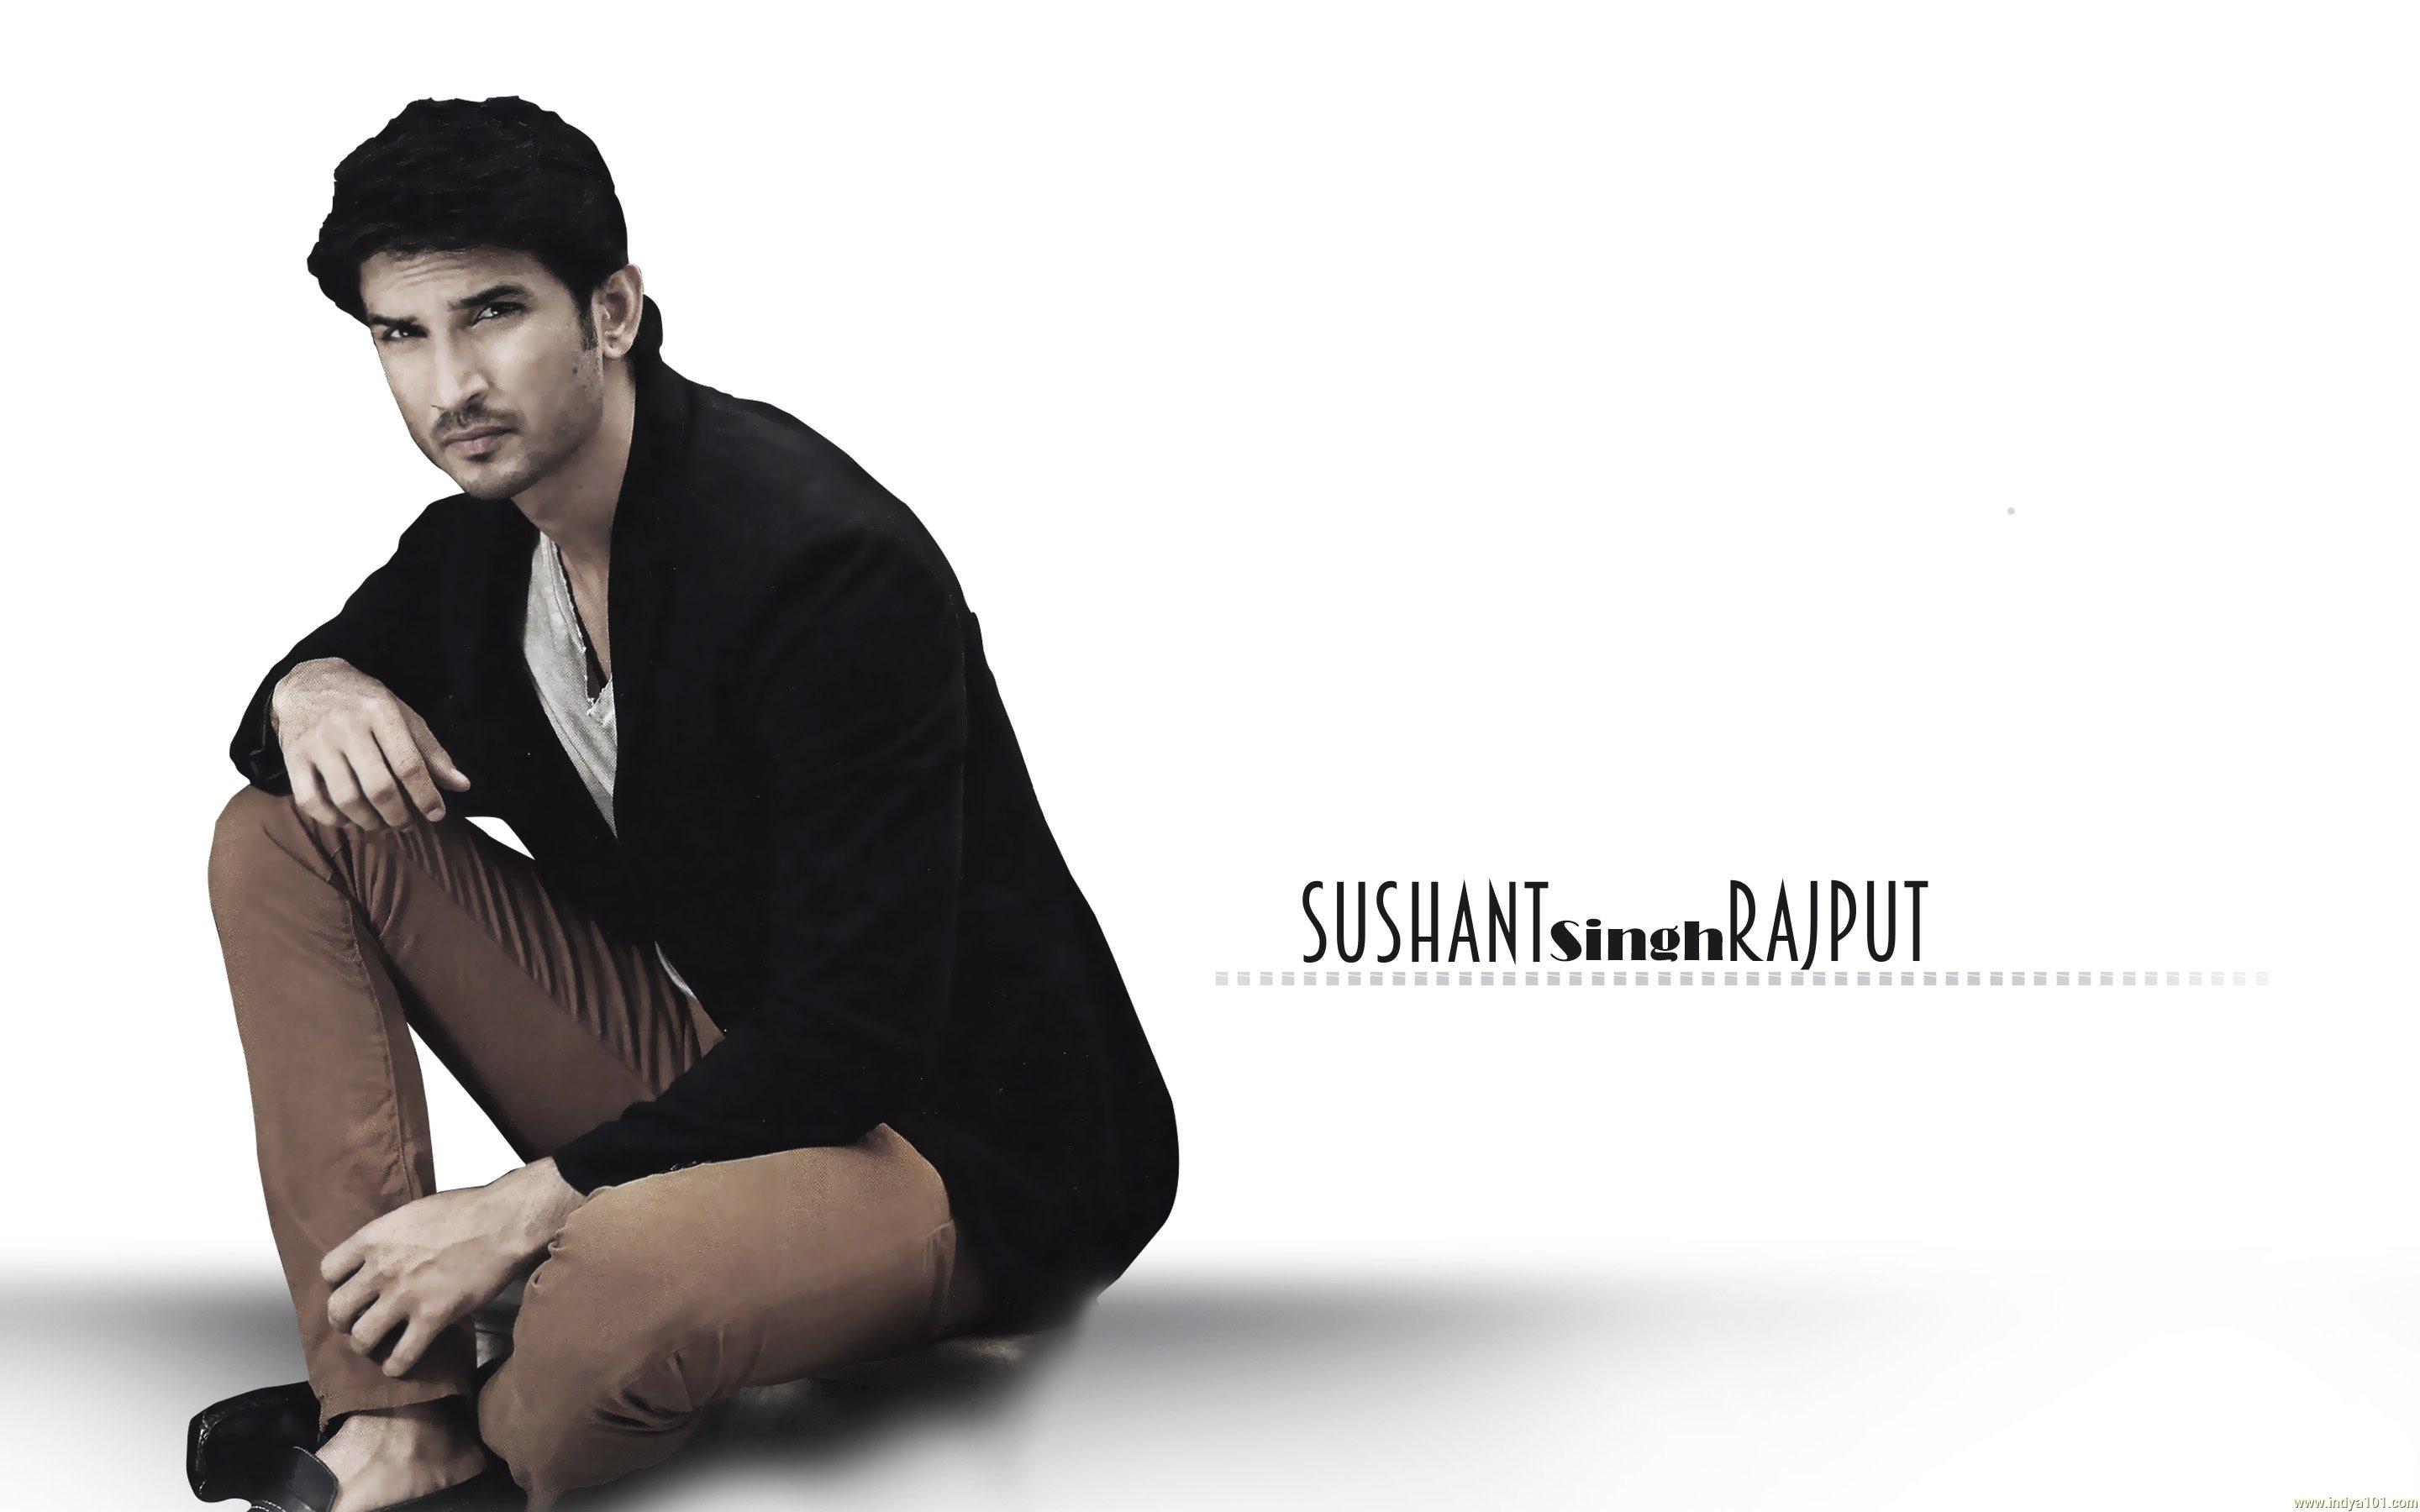 Sushant Singh Rajput Wallpapers Wallpaper Cave Screenshots, wallpapers, vacation pictures, promotional posters sushant singh rajput wallpapers